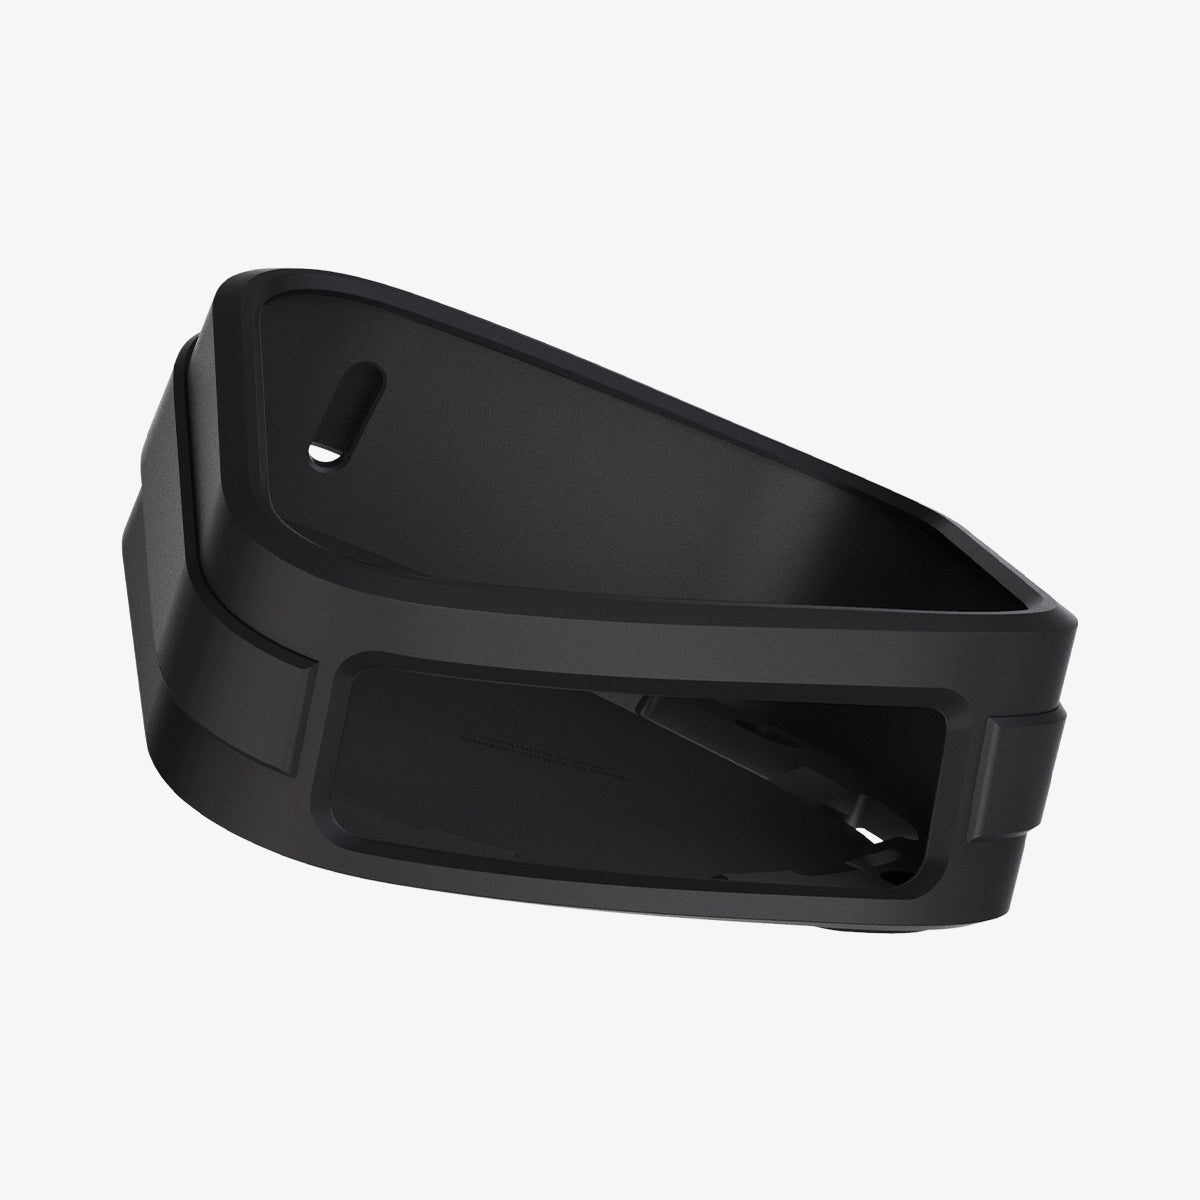 AMP03785 - Apple TV 4K Mount Silicone Fit in black showing the case bending slightly to show the flexibility